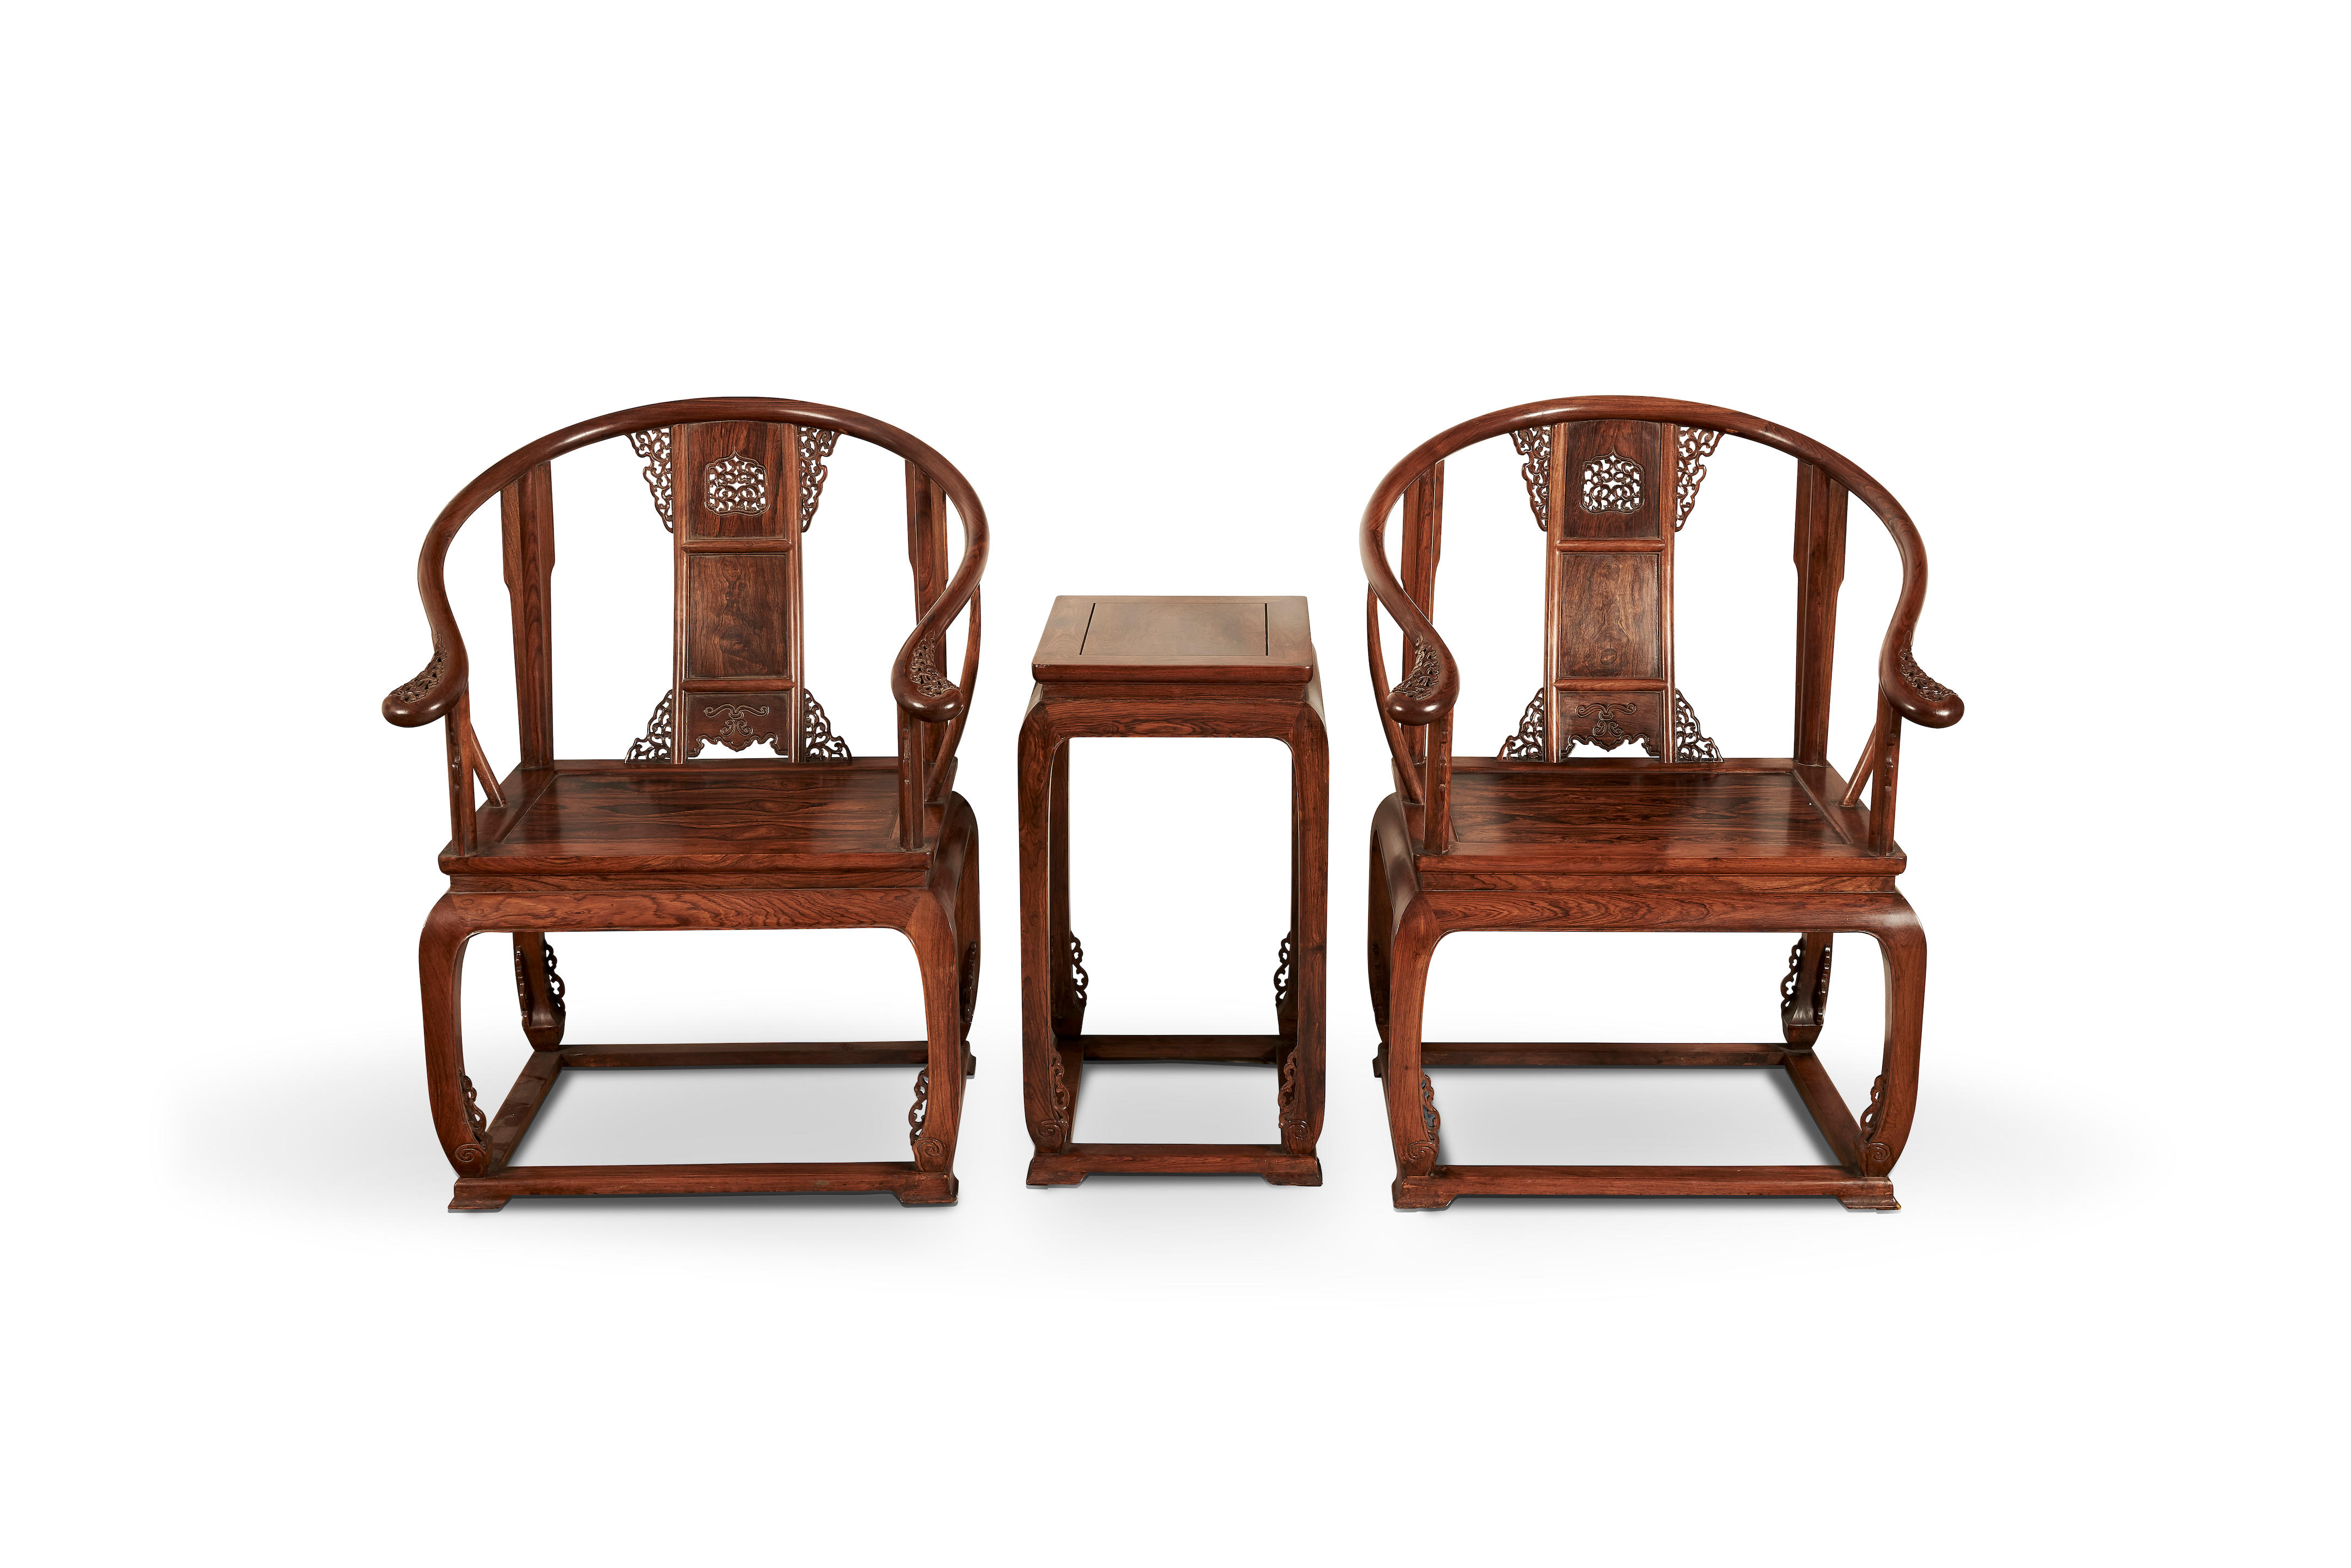 A pair of huanghuali chairs and a side table